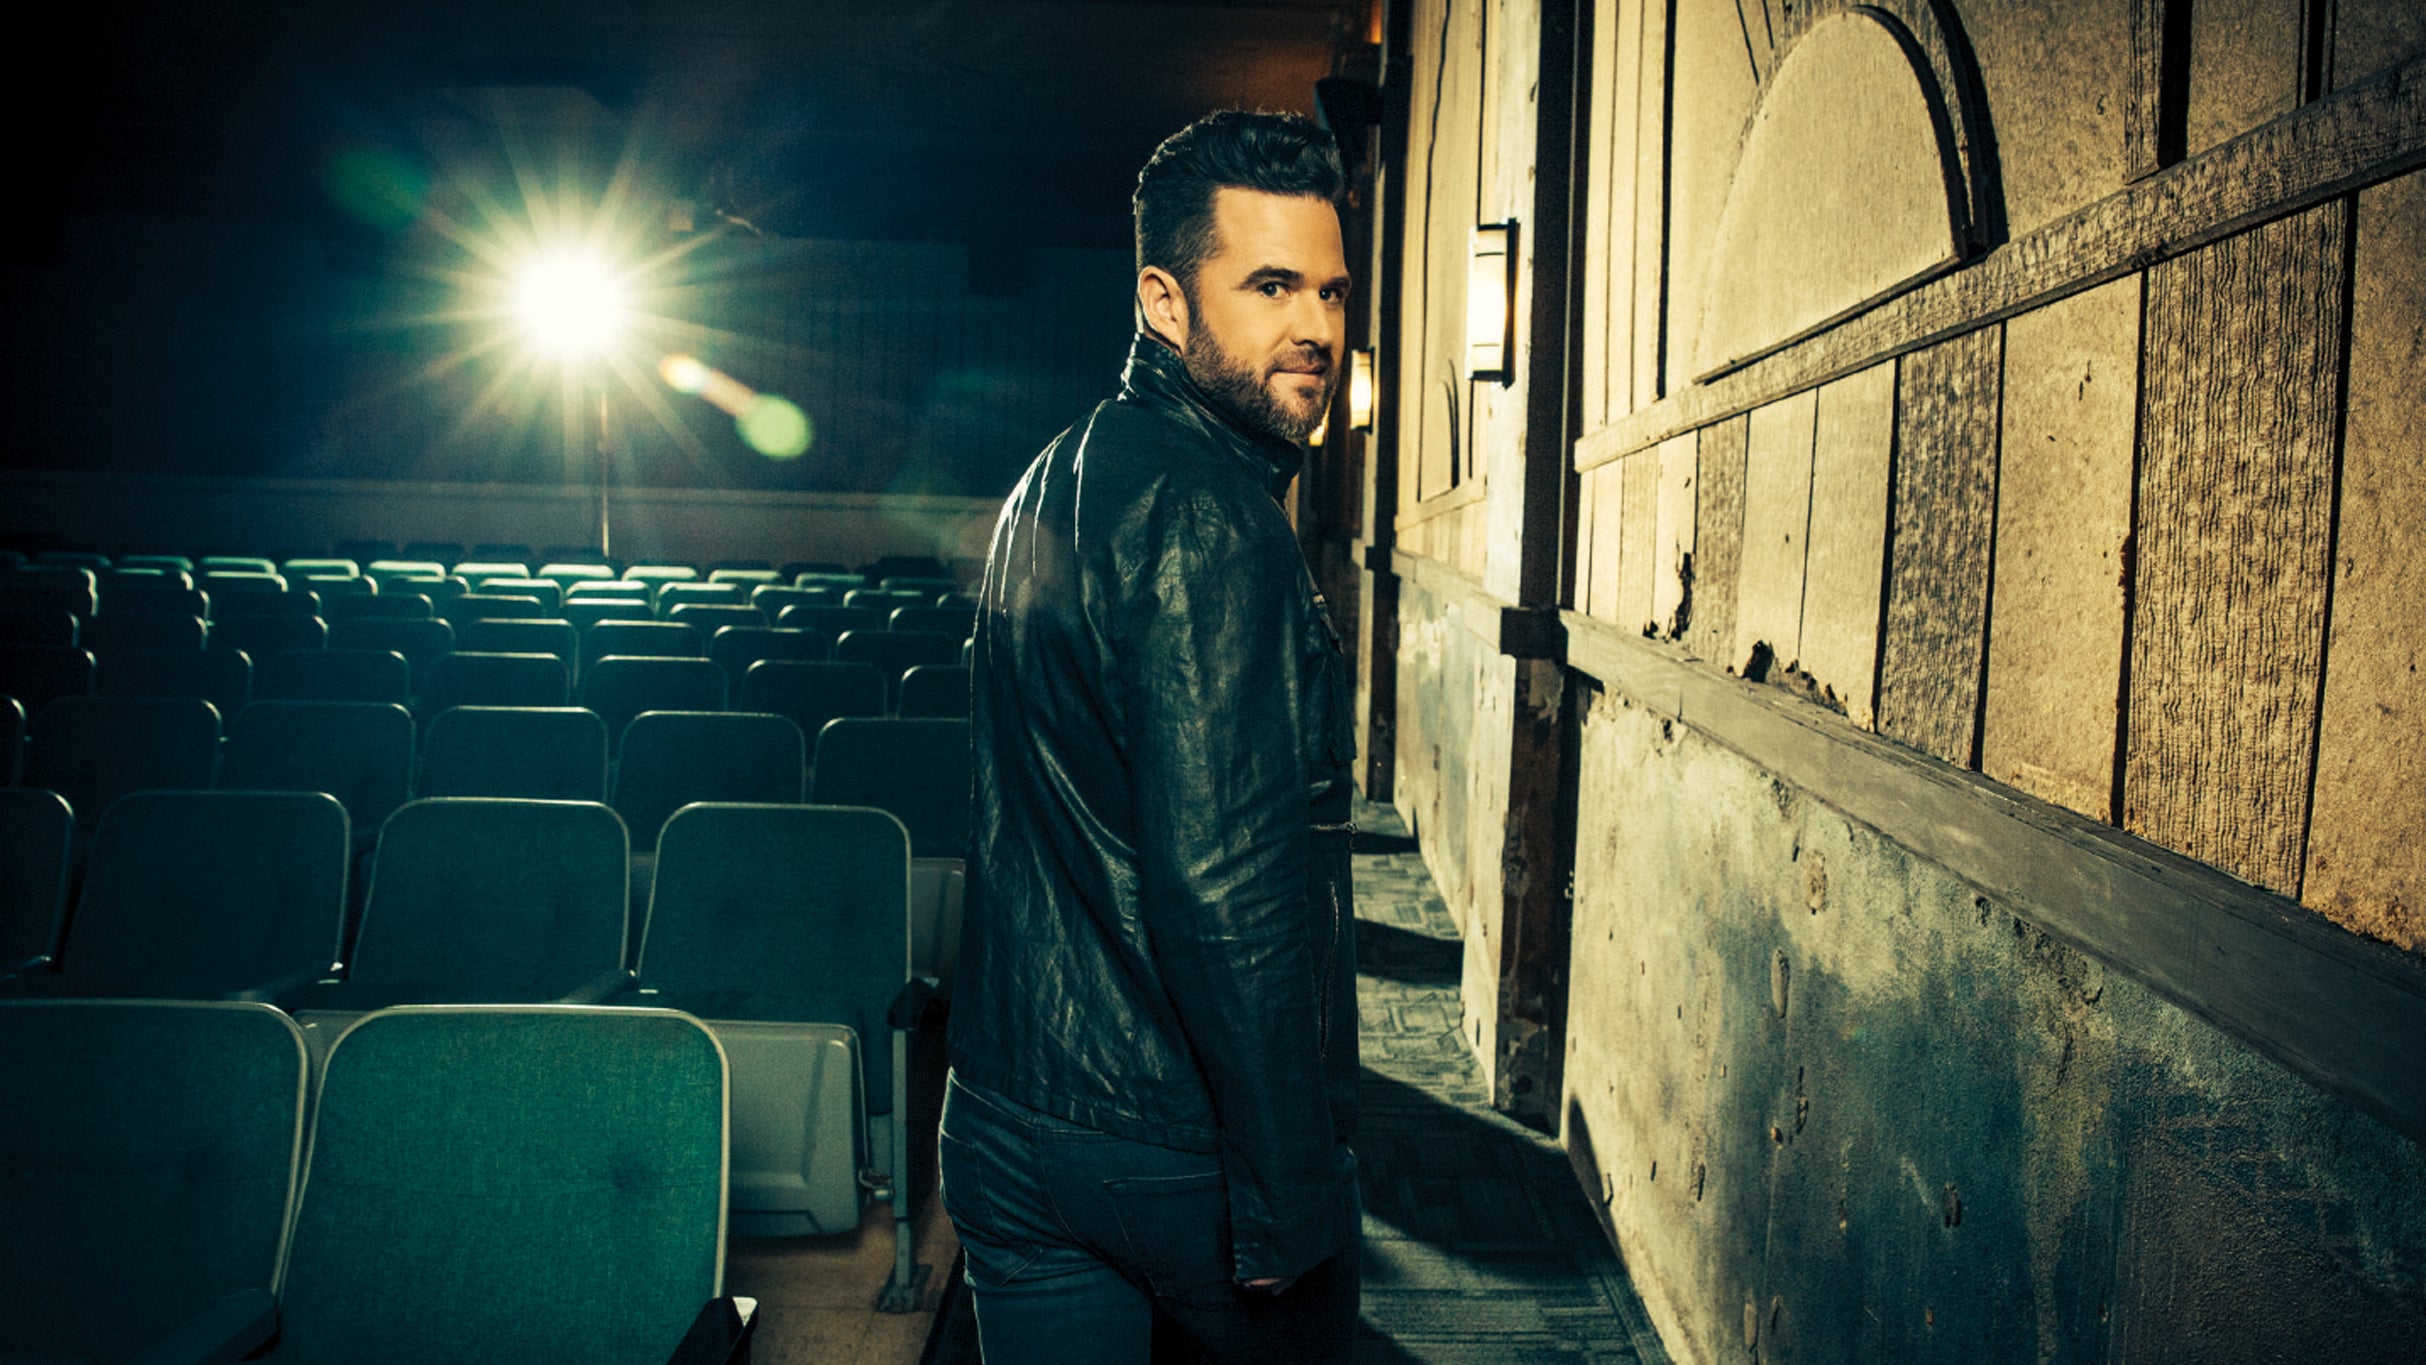 David Nail in Verona promo photo for VIP Package Onsale presale offer code